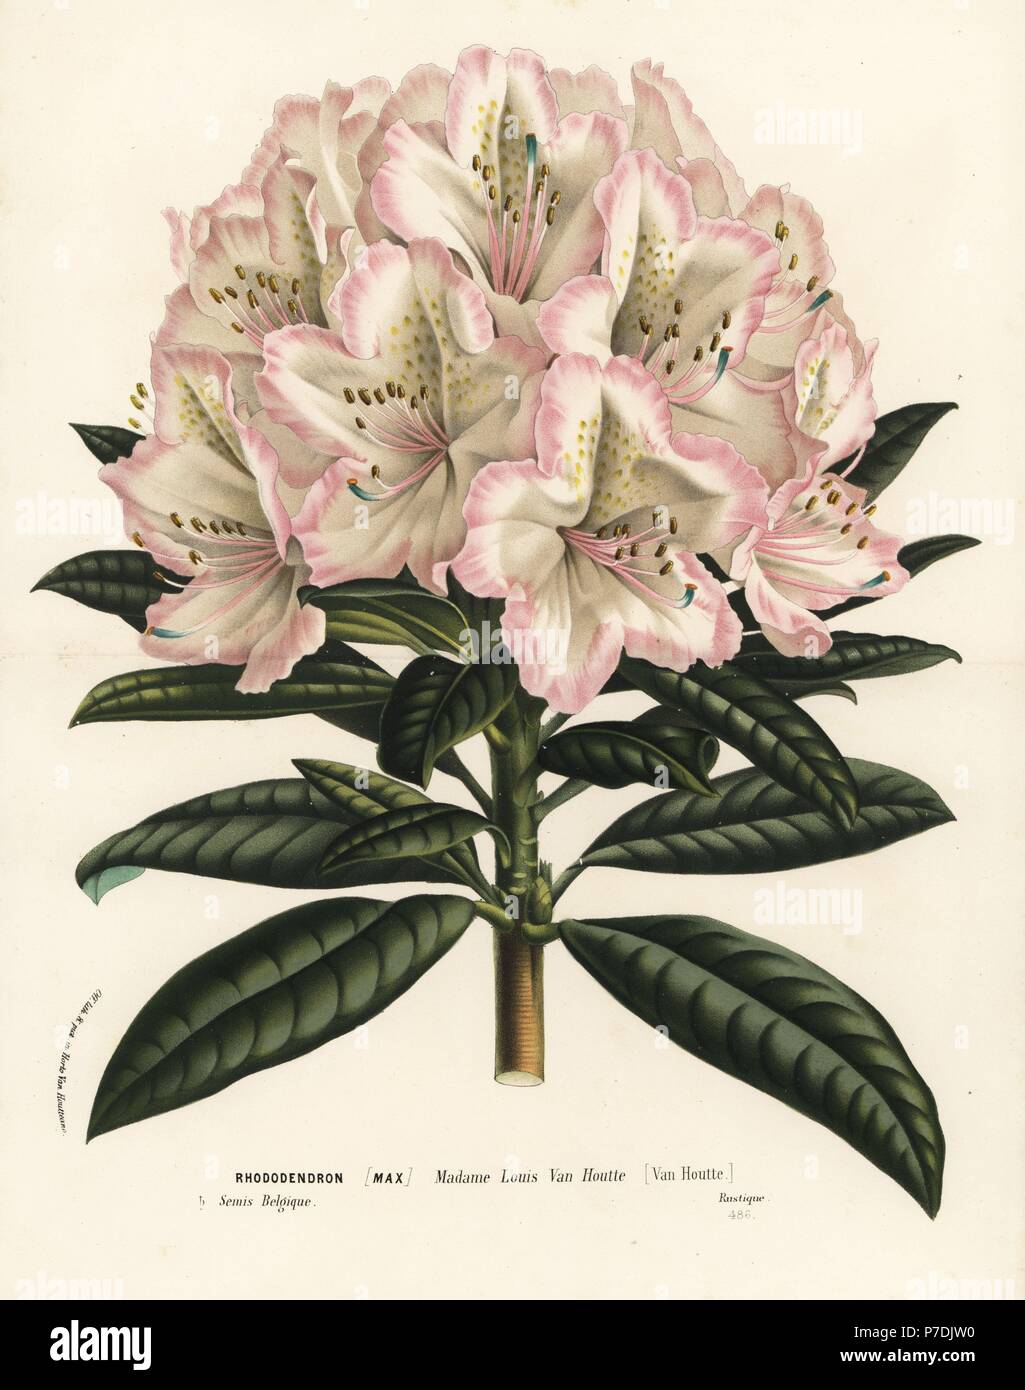 Rhododendron cultivar, Madame Louis van Houtte, Rhododendron maximum. Handcoloured lithograph from Louis van Houtte and Charles Lemaire's Flowers of the Gardens and Hothouses of Europe, Flore des Serres et des Jardins de l'Europe, Ghent, Belgium, 1862-65. Stock Photo